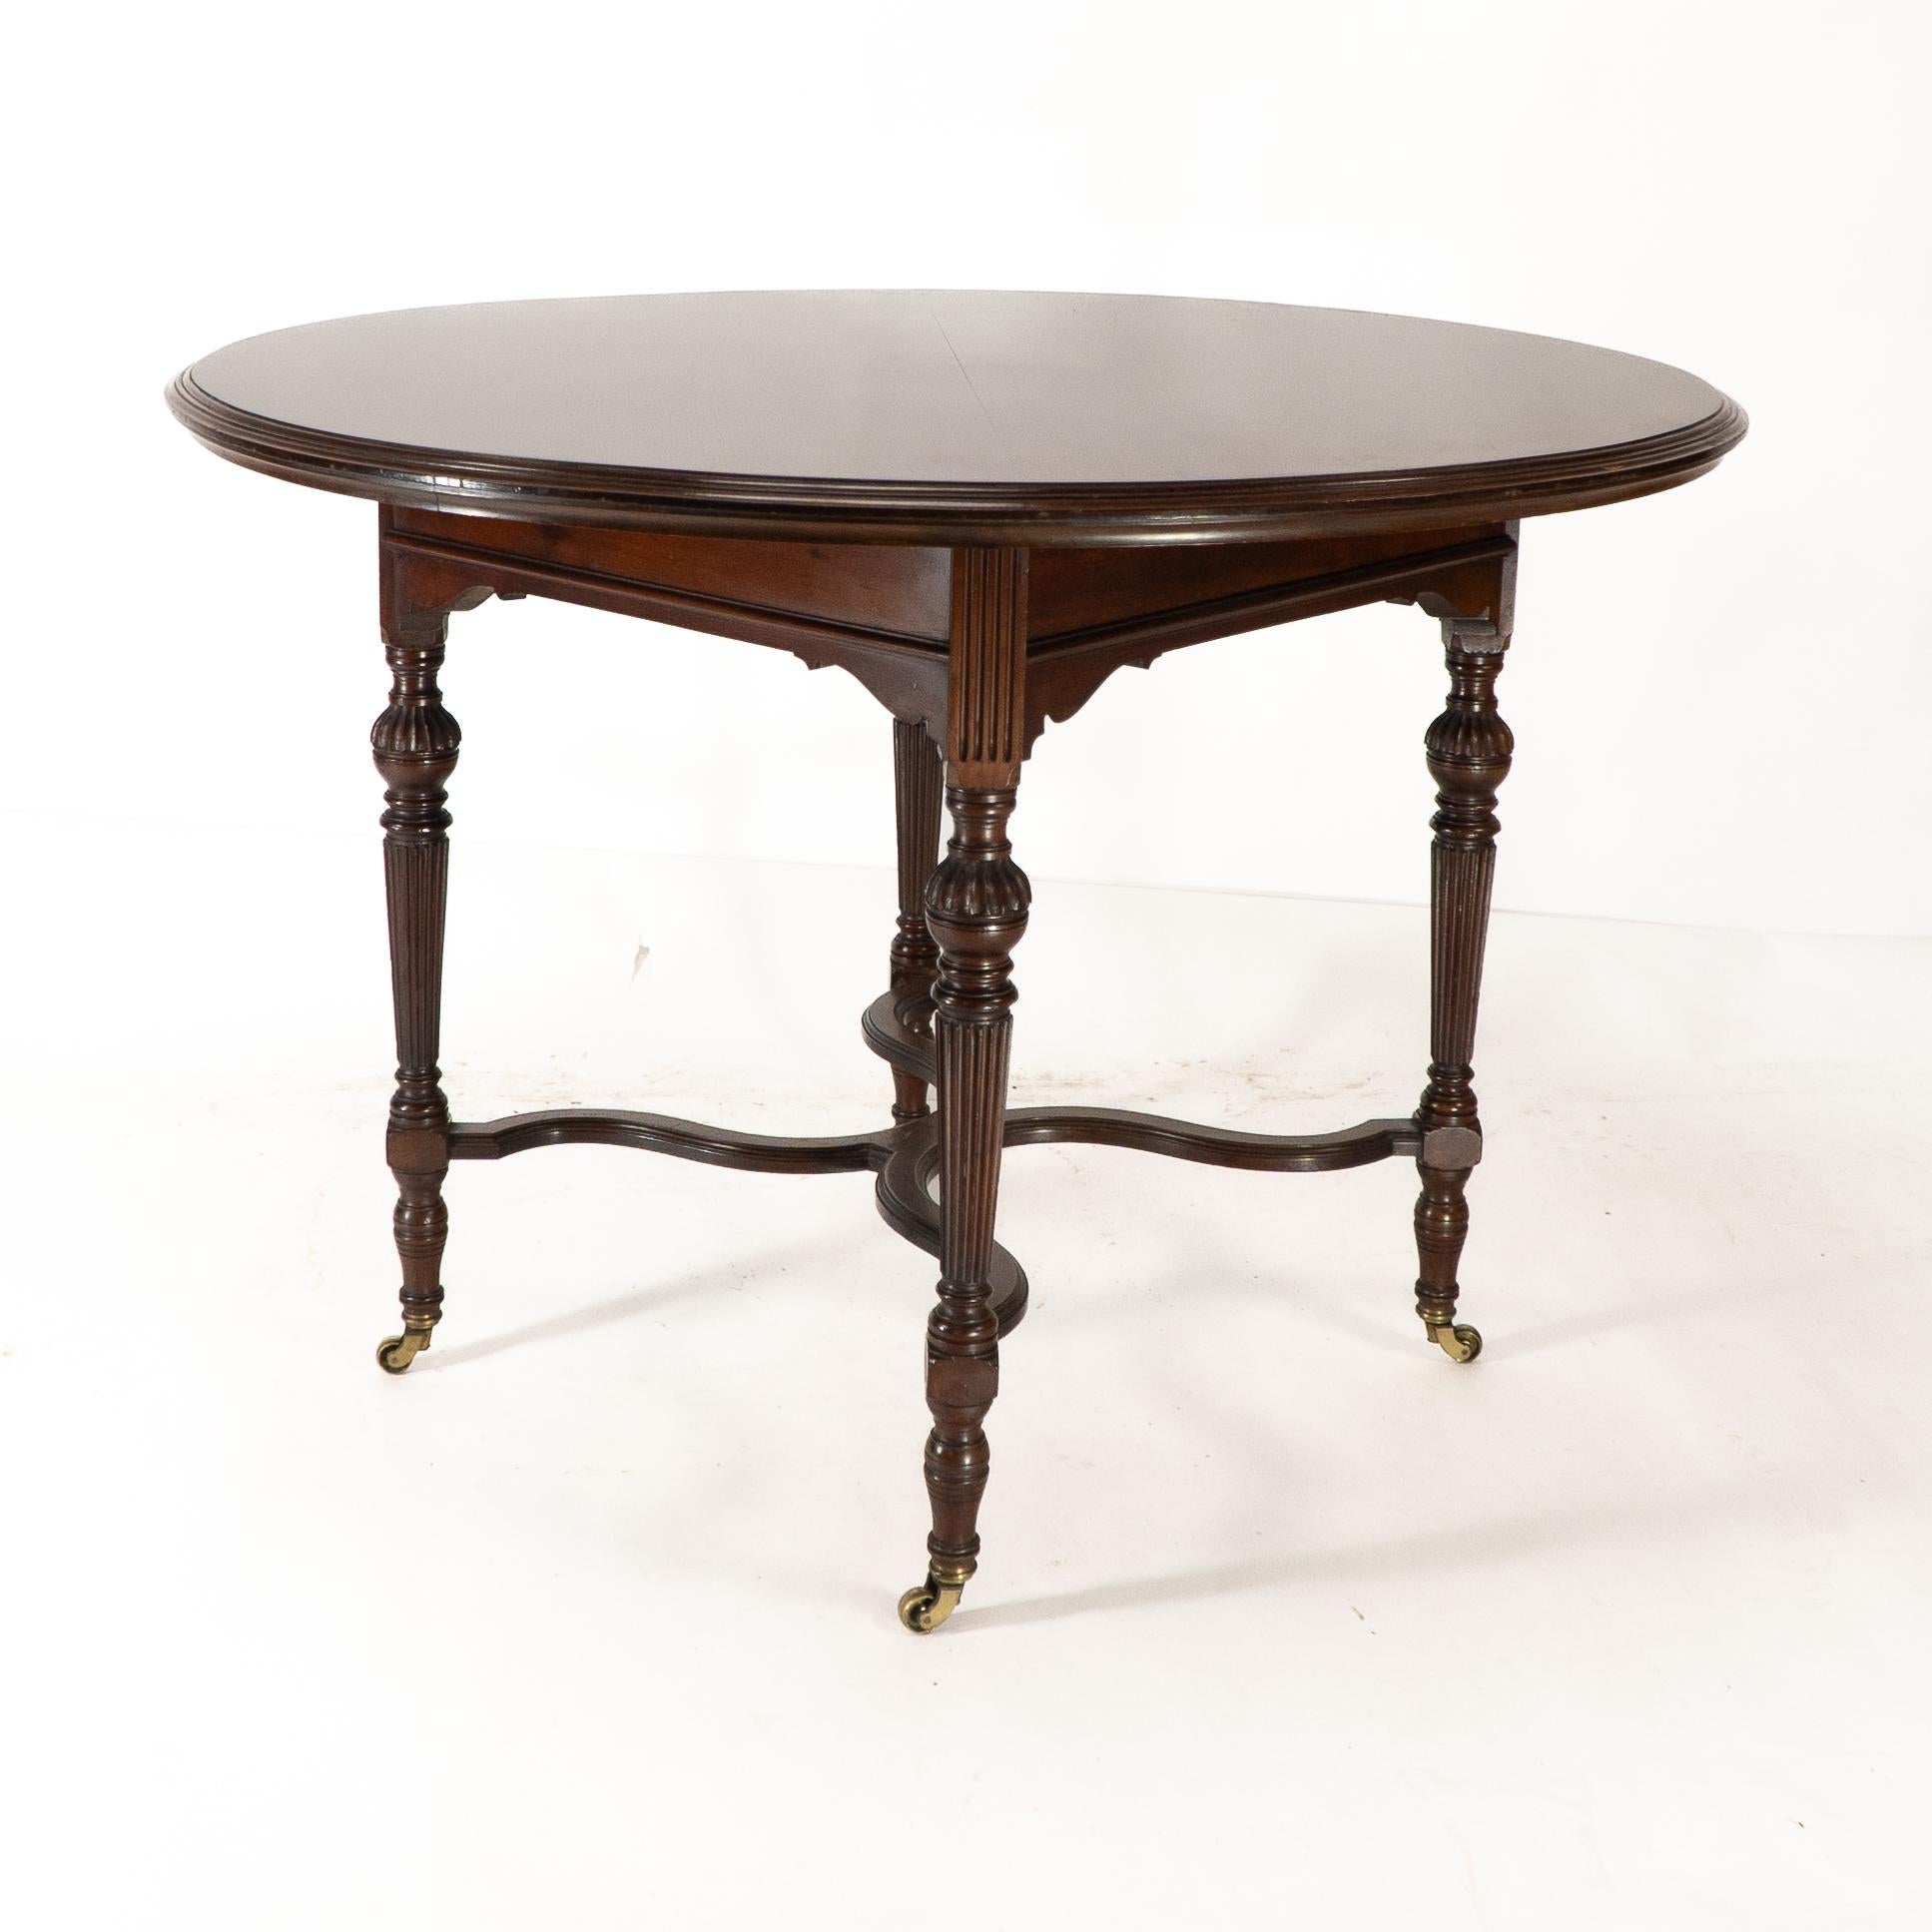 Collinson & Lock attributed. An Aesthetic Movement walnut circular center table For Sale 2